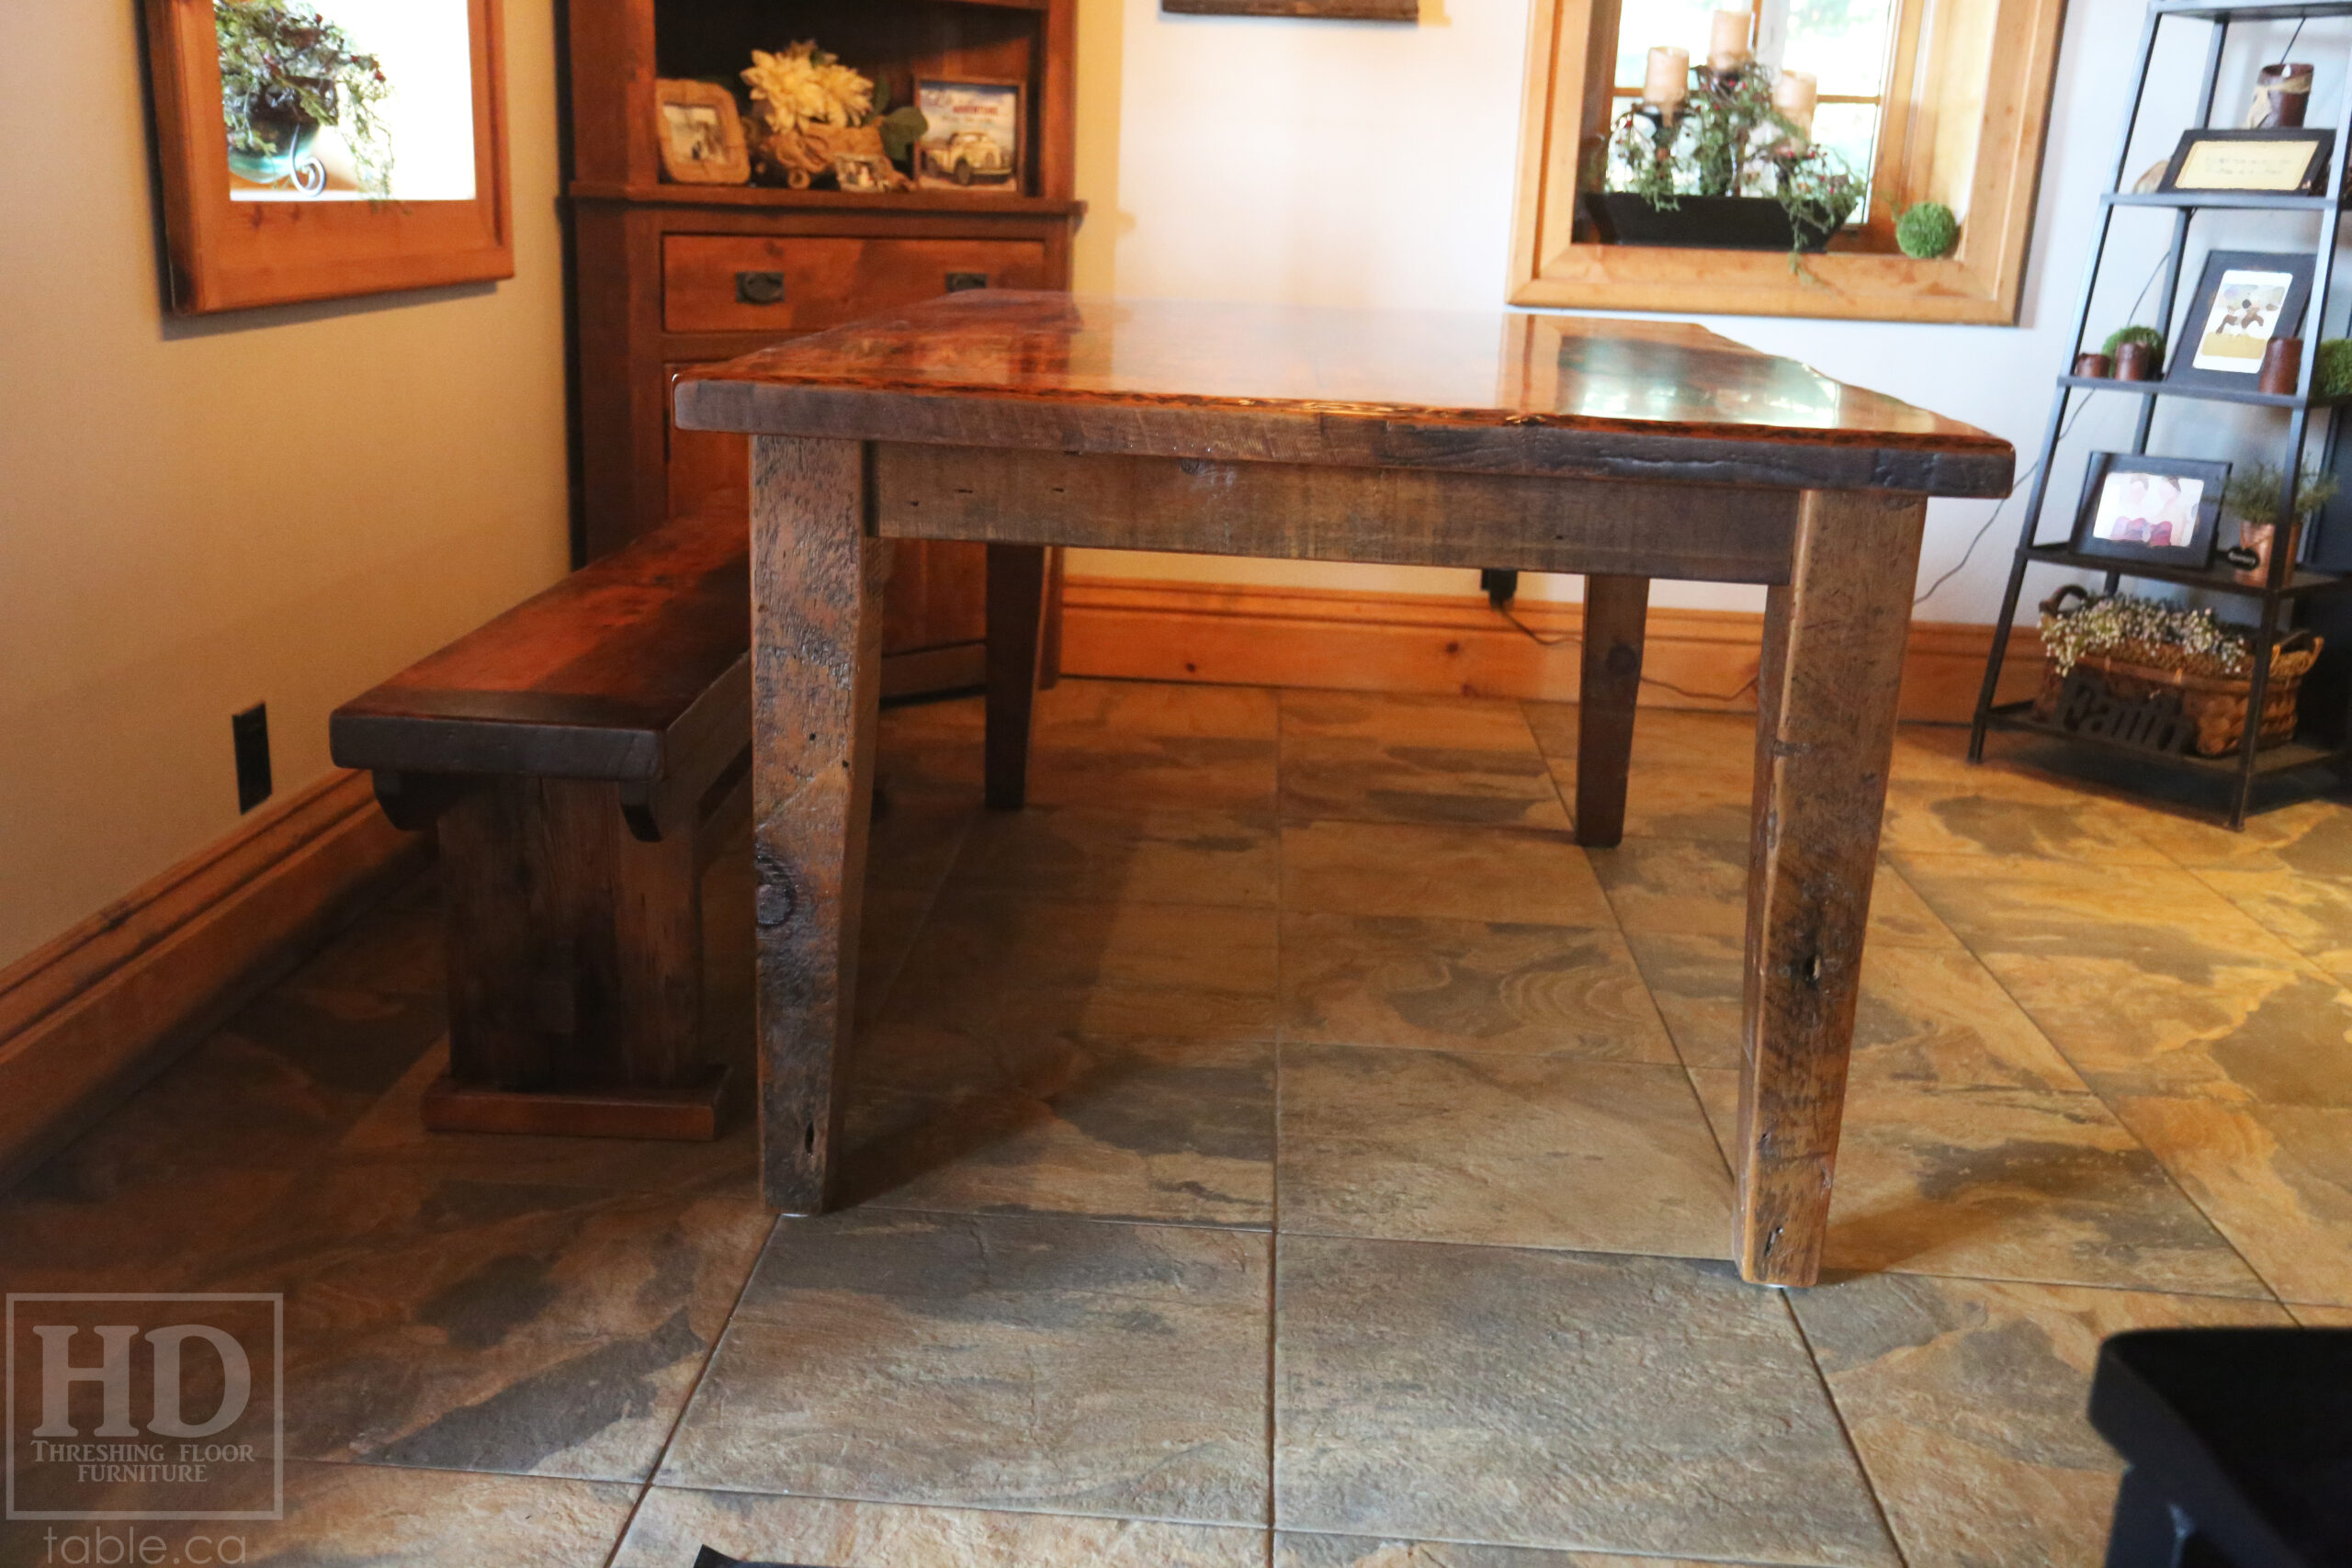 5' Reclaimed Ontario Barnwood Table we made for an Ariss, Ontario Home - 42" deep - Harvest Base: Tapered Windbrace Beam Legs - Old Growth Hemlock Threshing Floor Construction - Original edges & distressing maintained - Premium epoxy + satin polyurethane finish - 5' [matching] Bench - www.table.ca